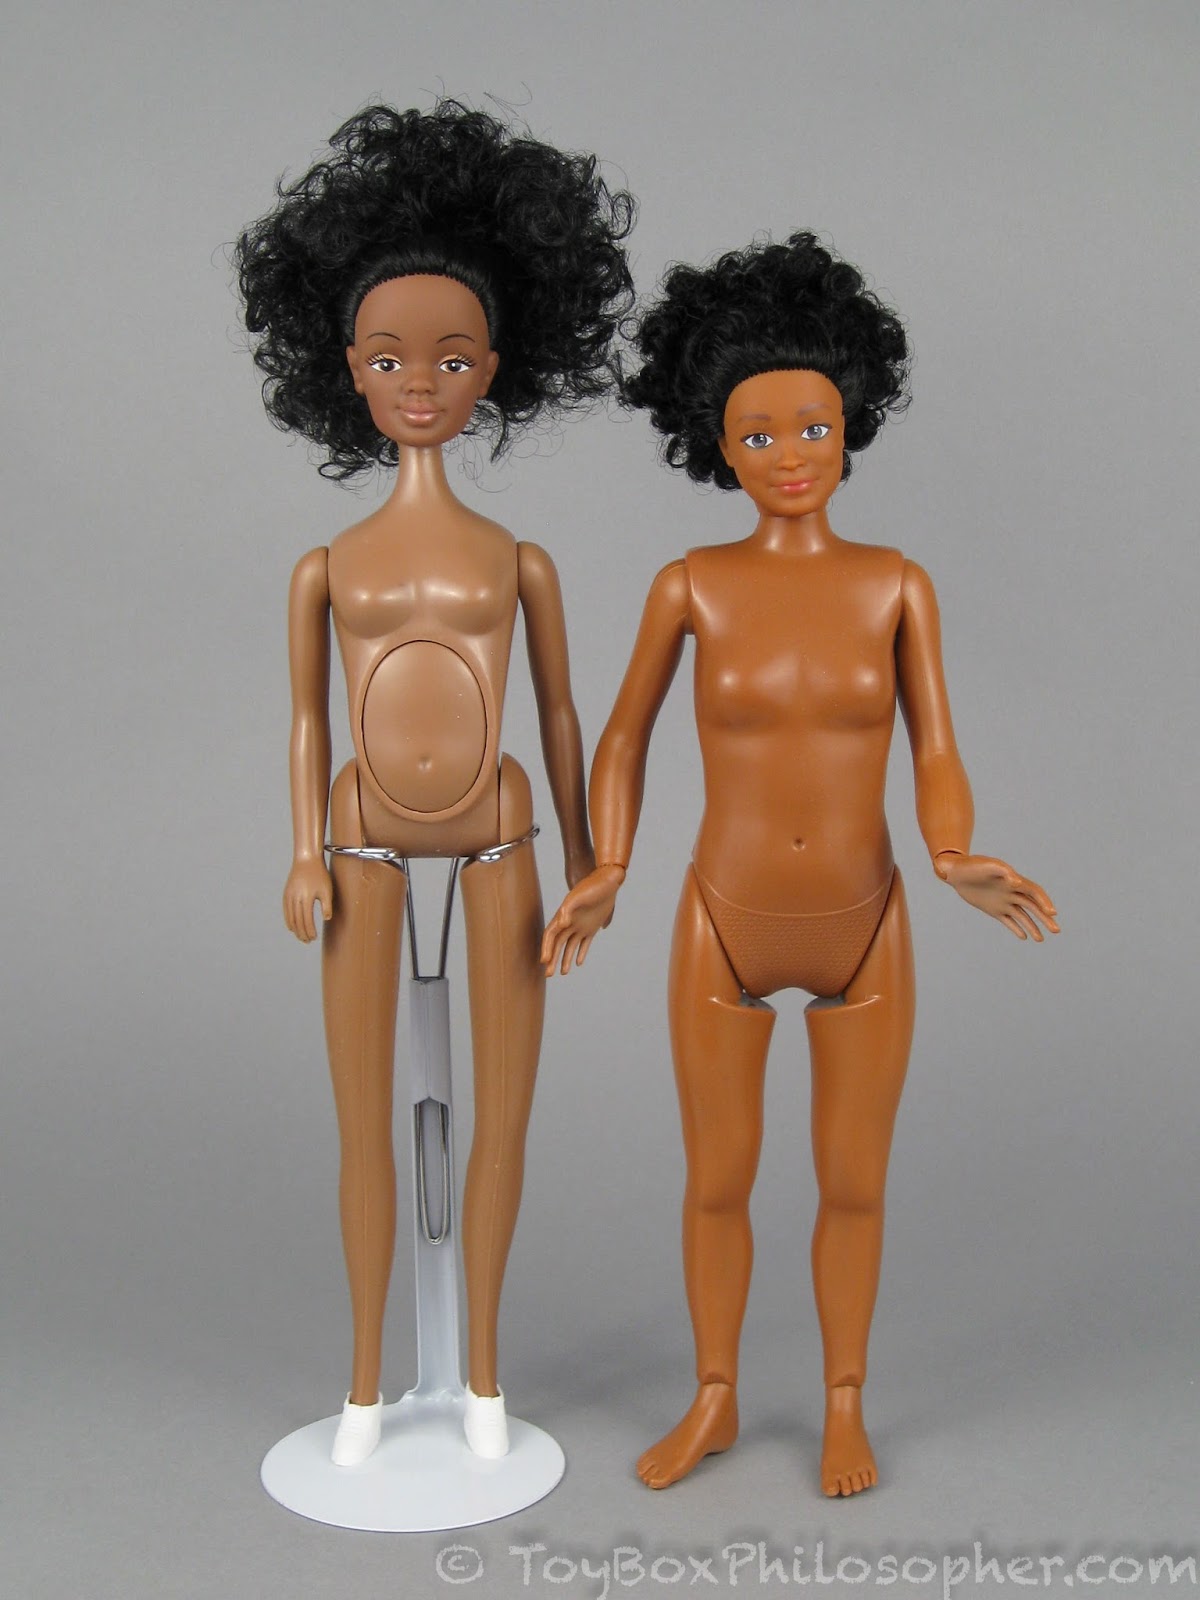 Judith Mommy-to-be doll (left) and Lammily Photographer (right). 